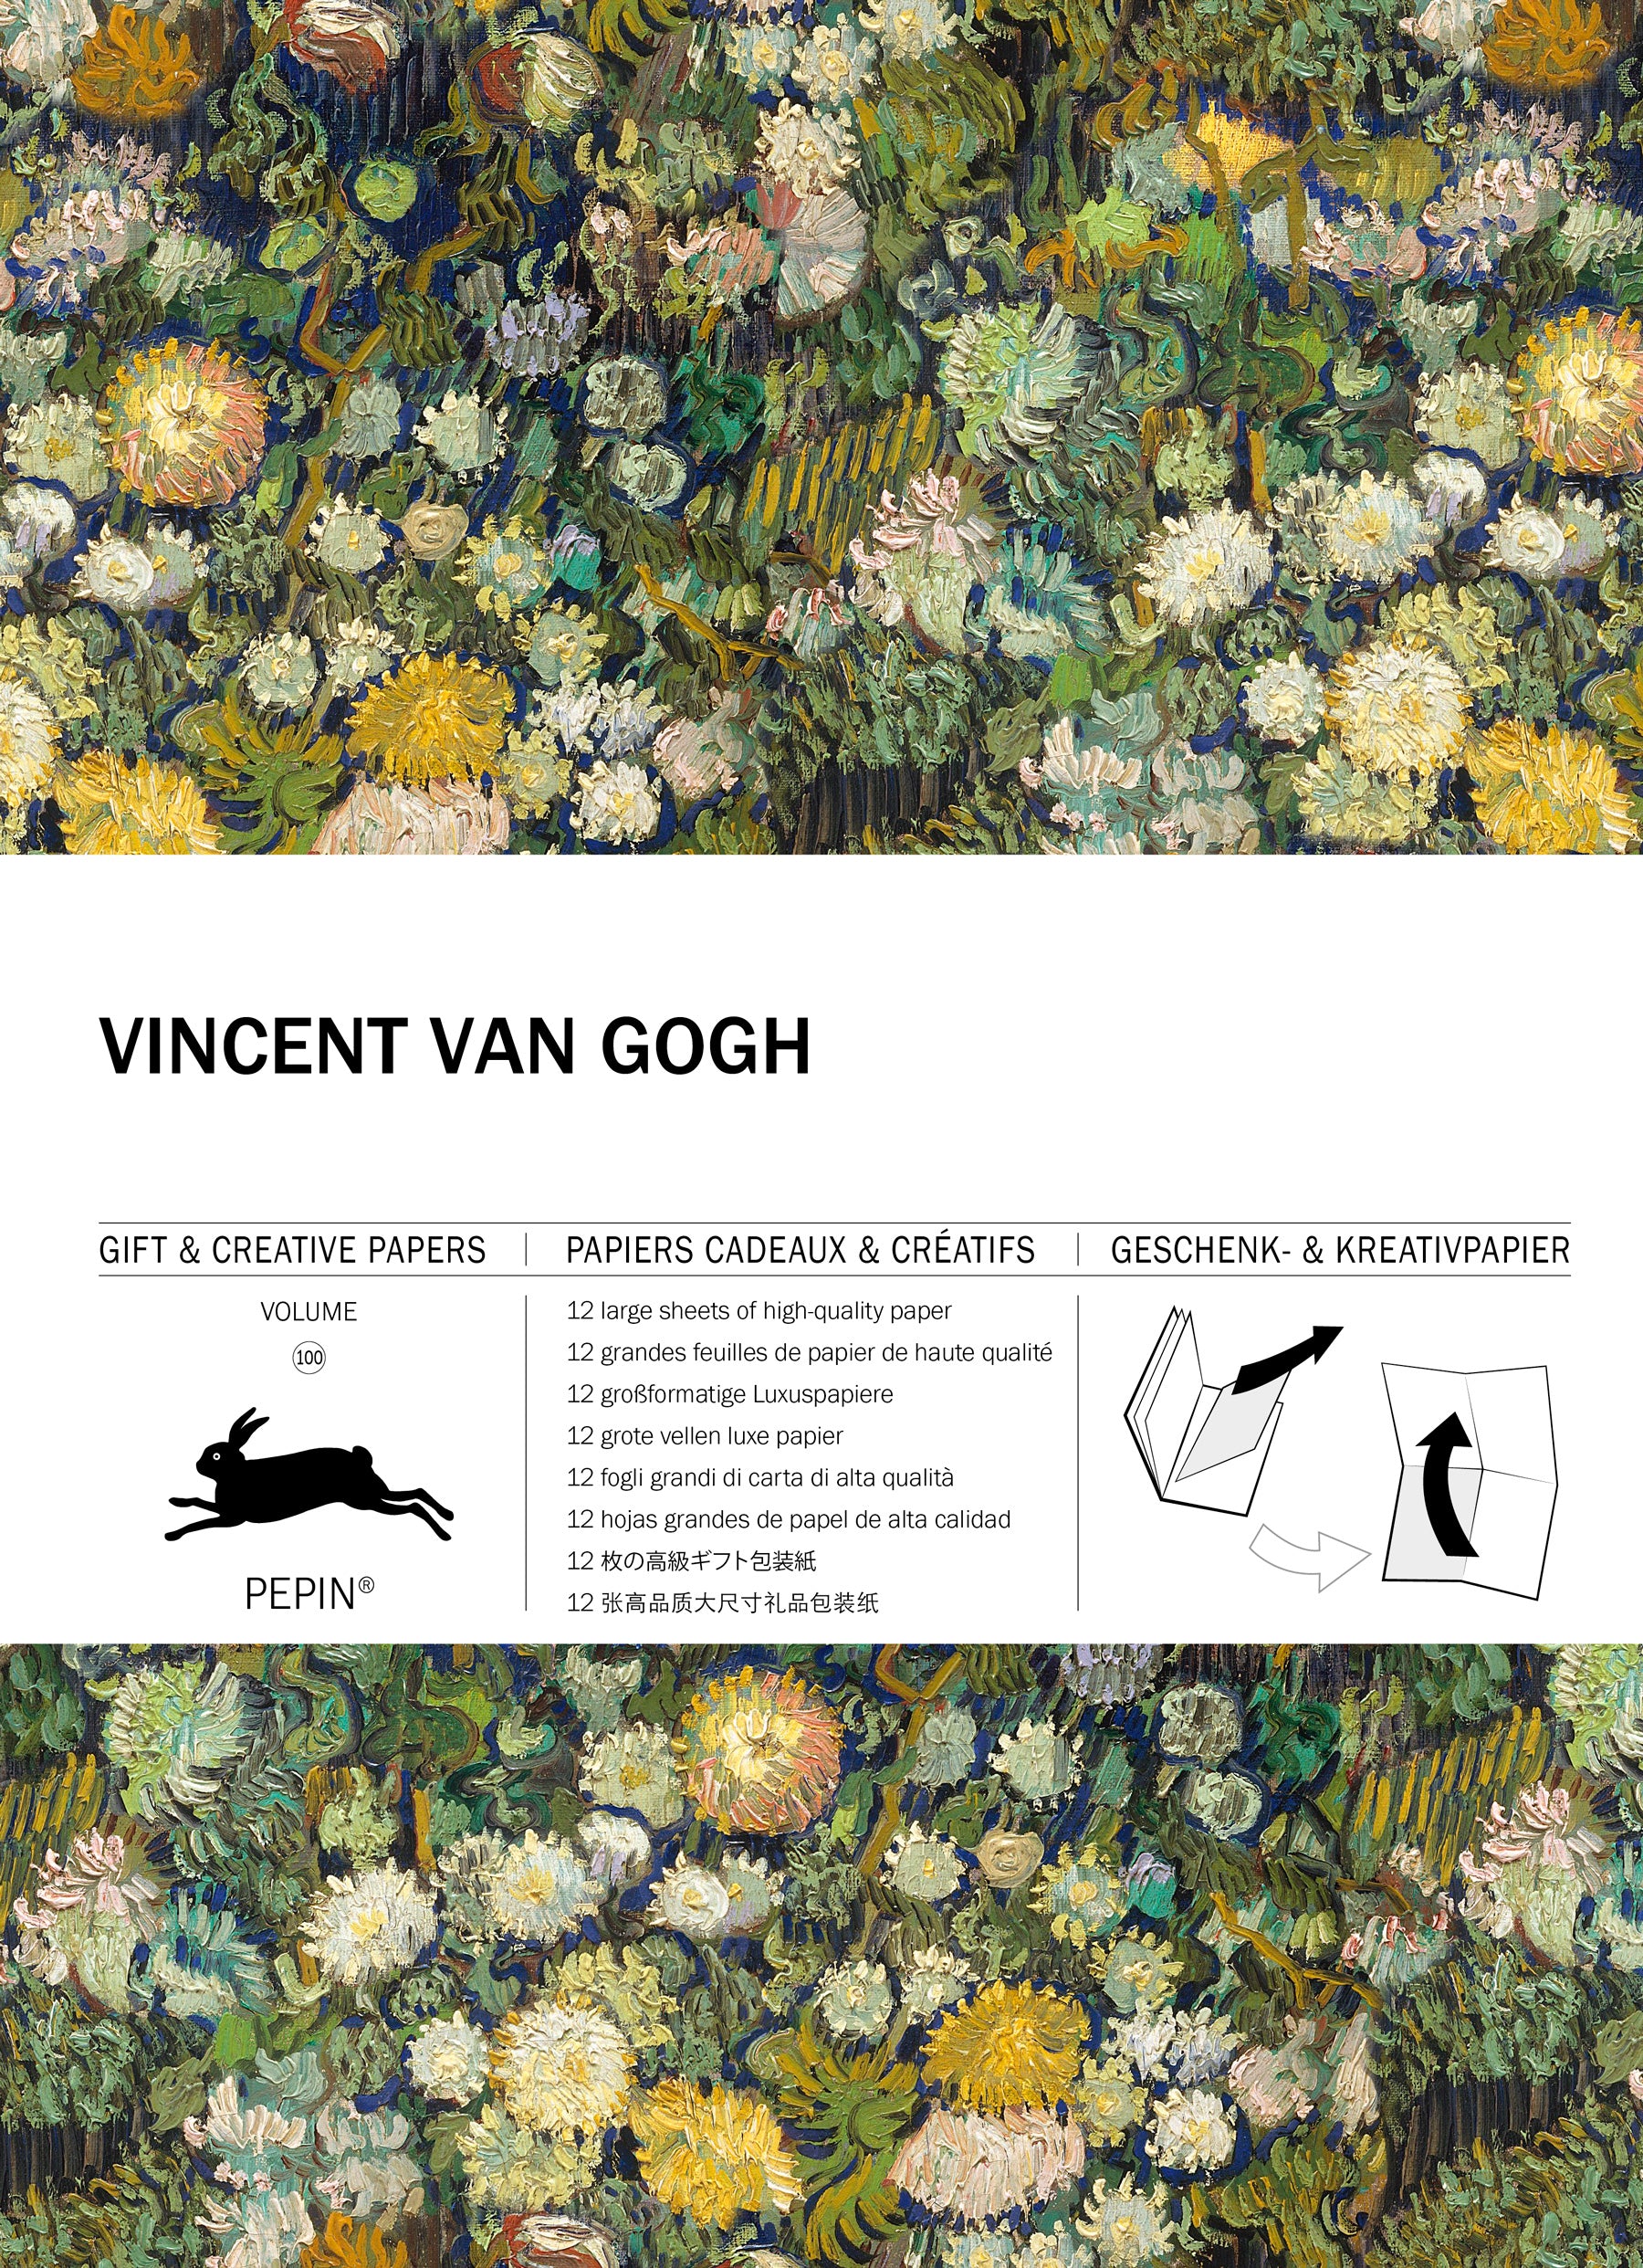 Gift &amp; creative papers - Vincent van Gogh